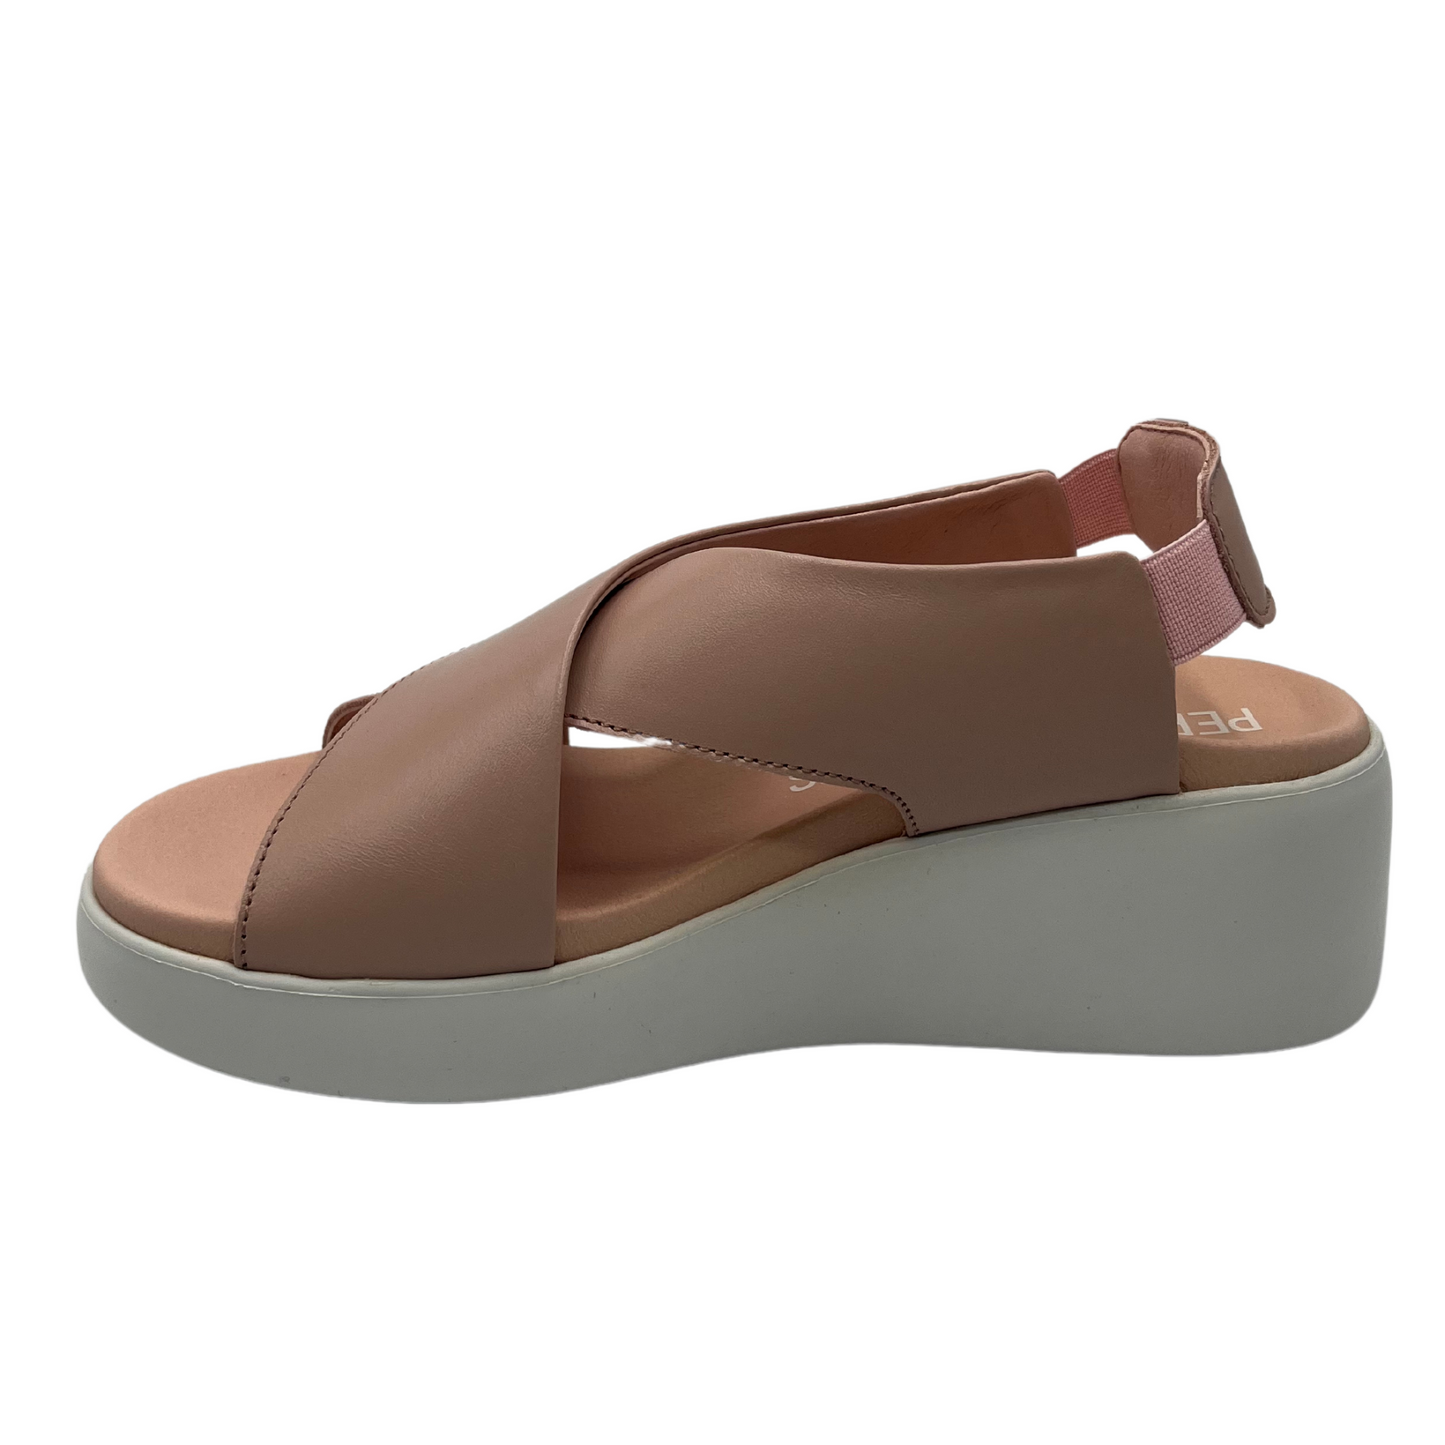 Left facing view of leather crisscross strap sandal with white wedge heel 